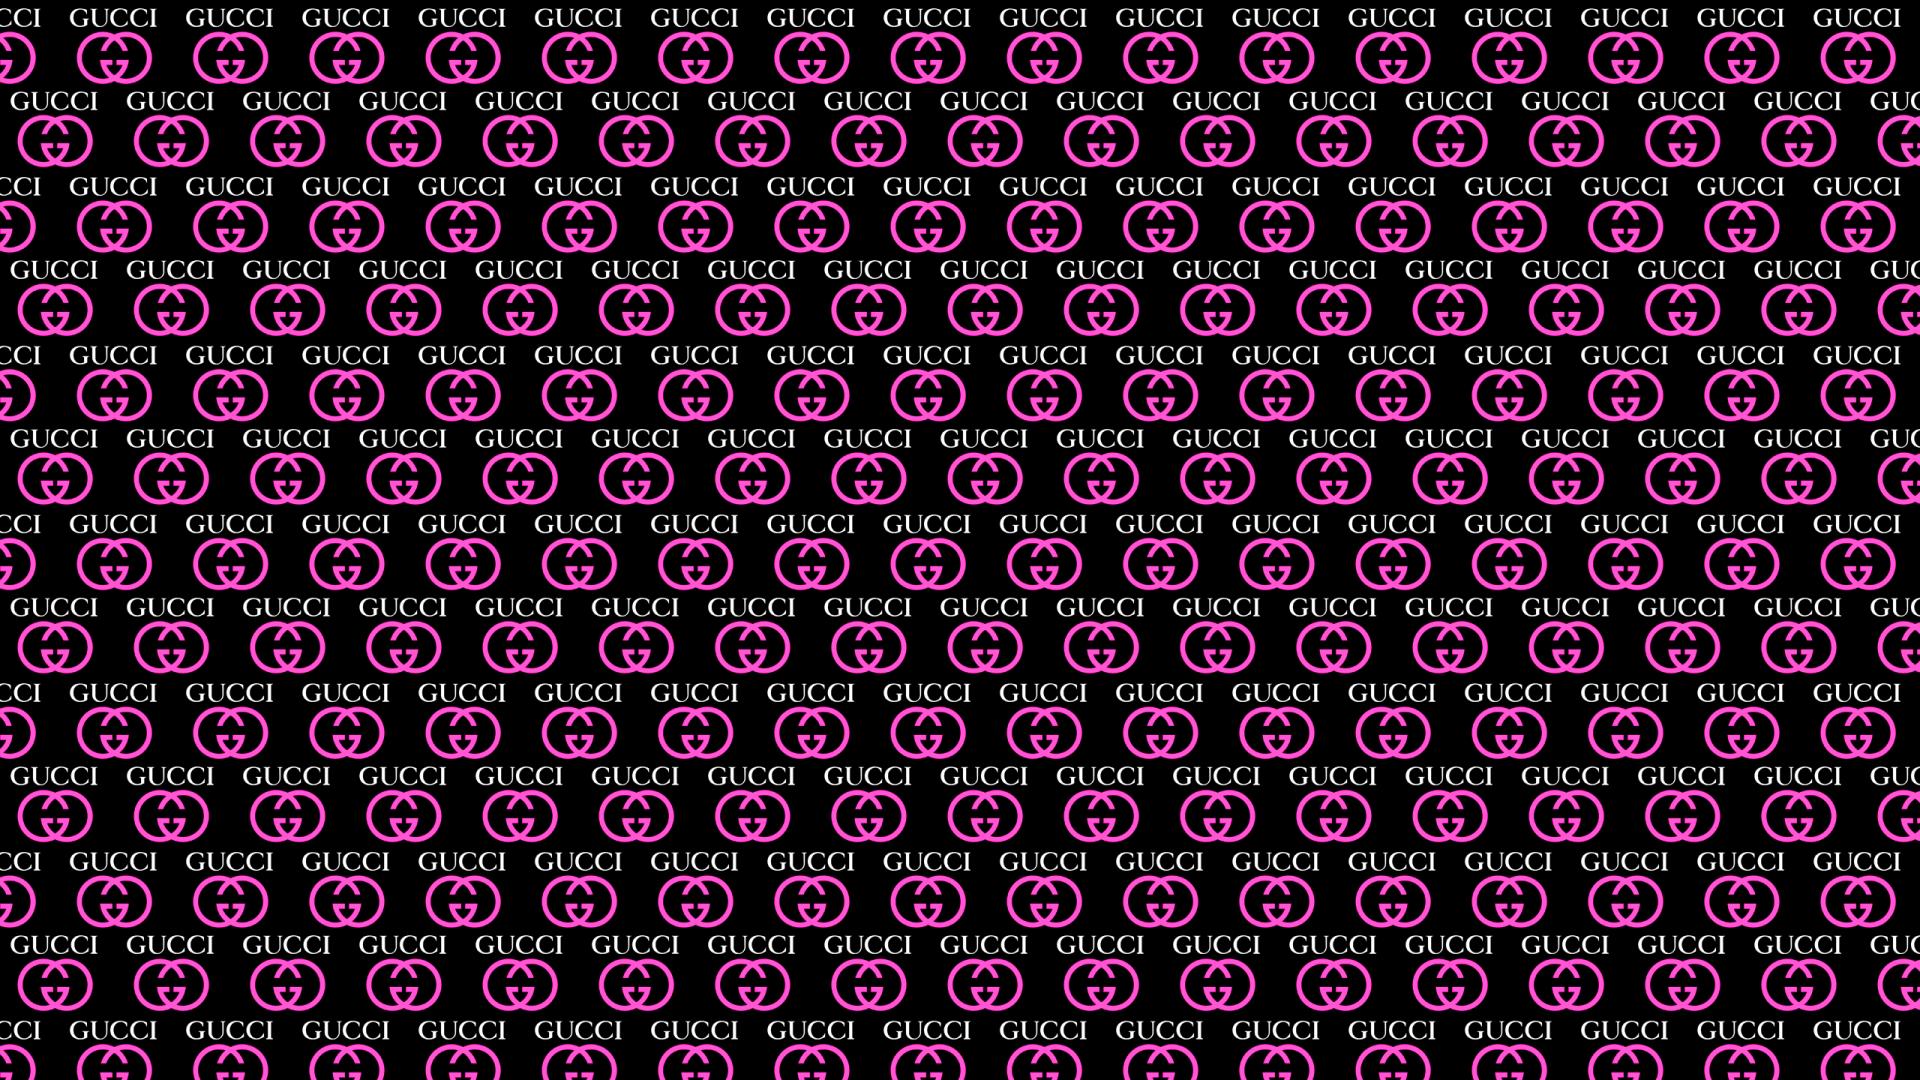 Free download this Pink Gucci Desktop Wallpaper is easy Just save the wallpaper [2560x1440] for your Desktop, Mobile & Tablet. Explore Gucci Wallpaper. Gucci Wallpaper, Gucci Wallpaper, Gucci Logo Wallpaper